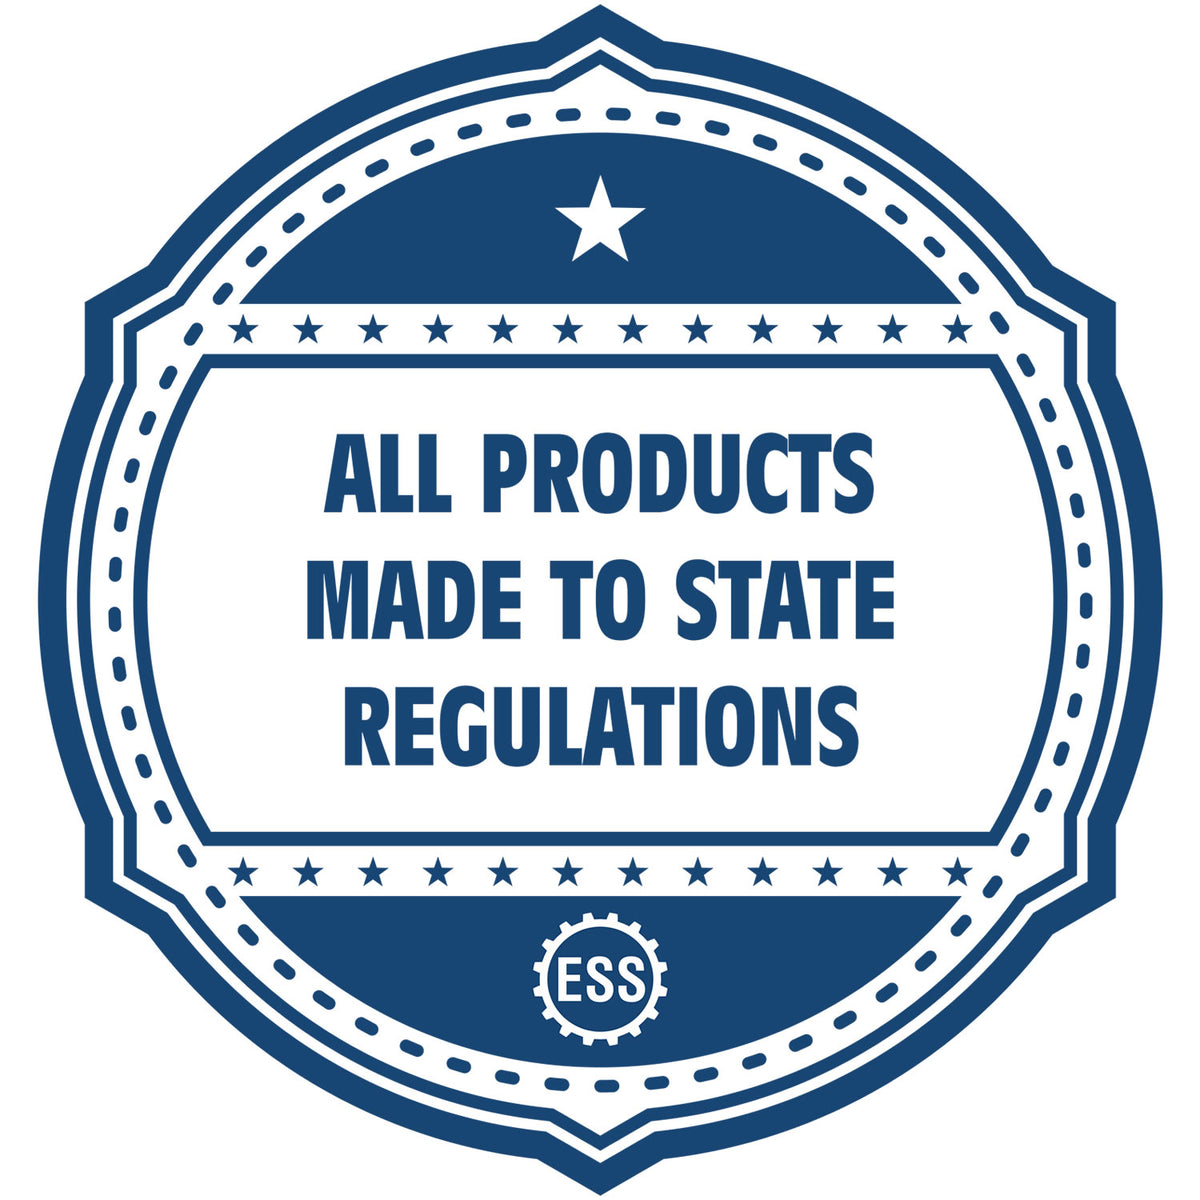 A blue icon or badge for the Gift Kentucky Land Surveyor Seal showing that this product is made in compliance with state regulations.